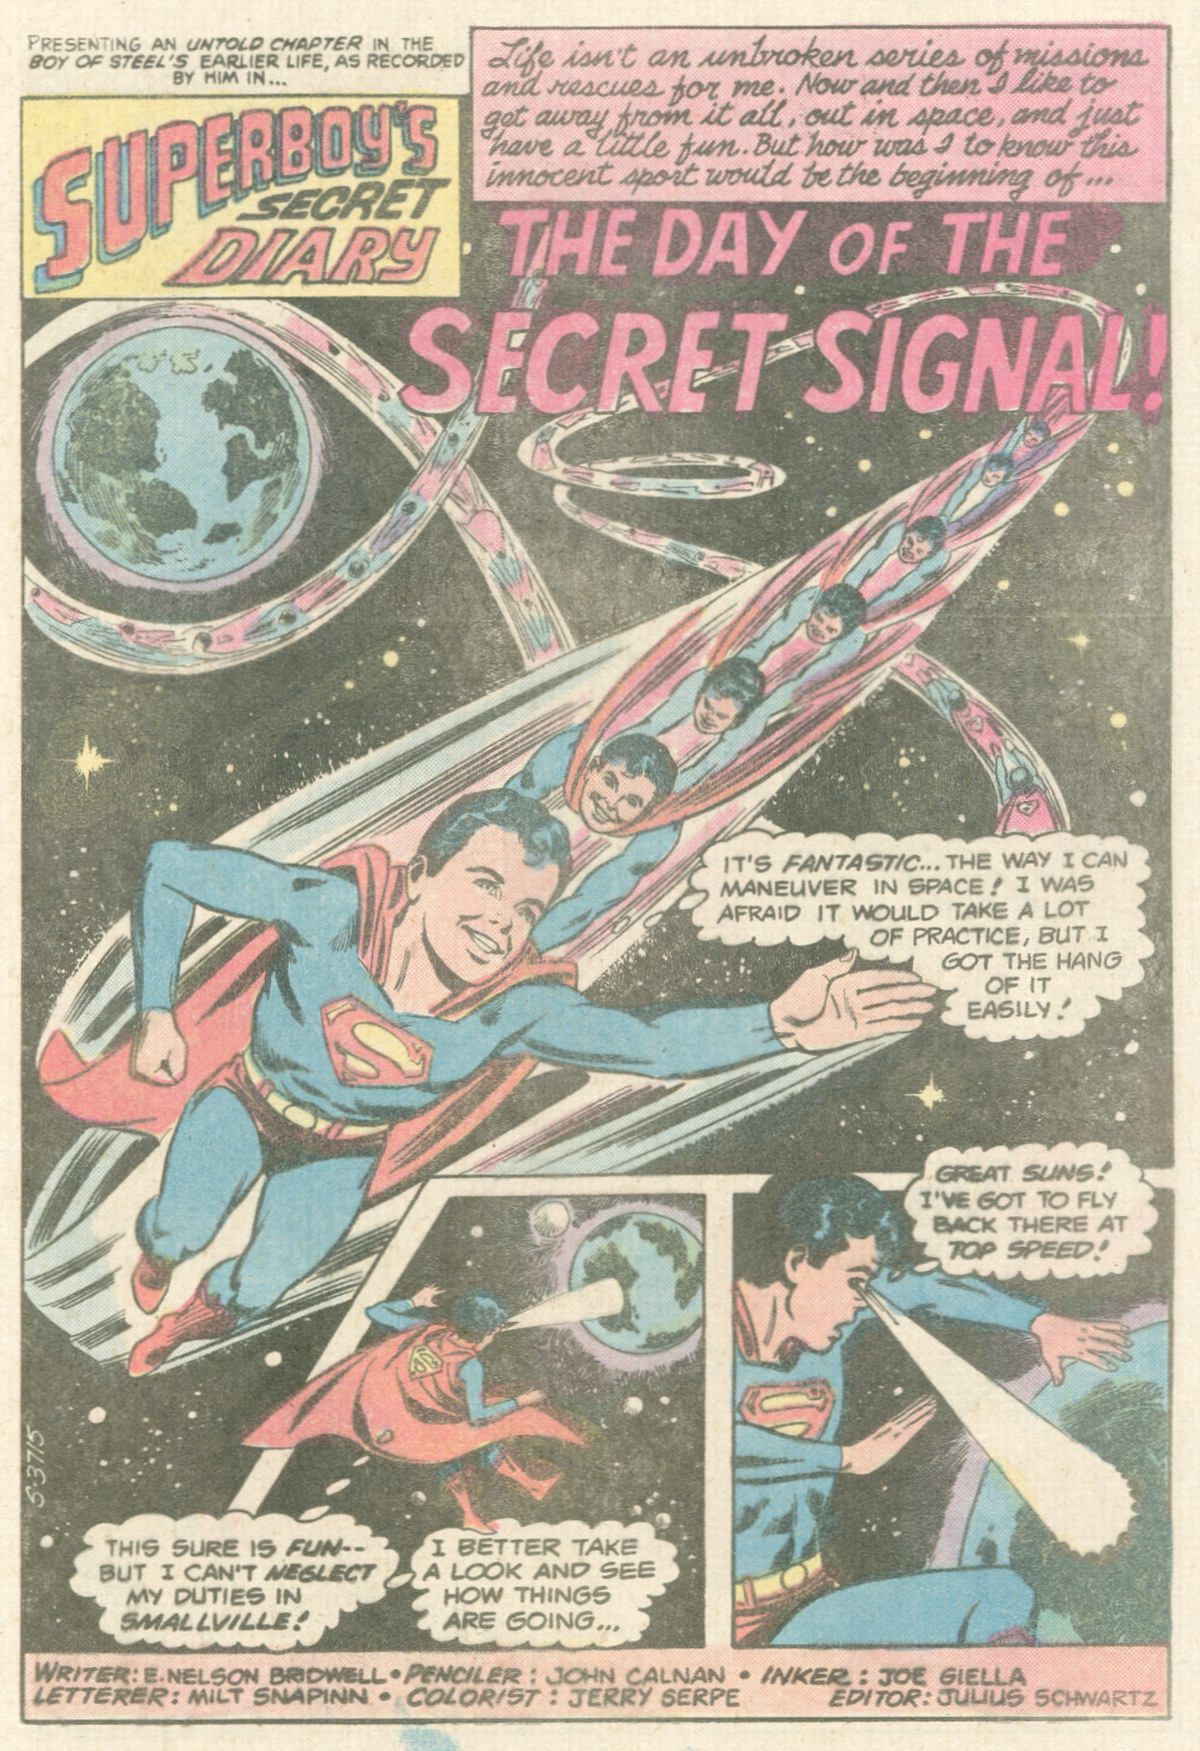 The New Adventures of Superboy 23 Page 20